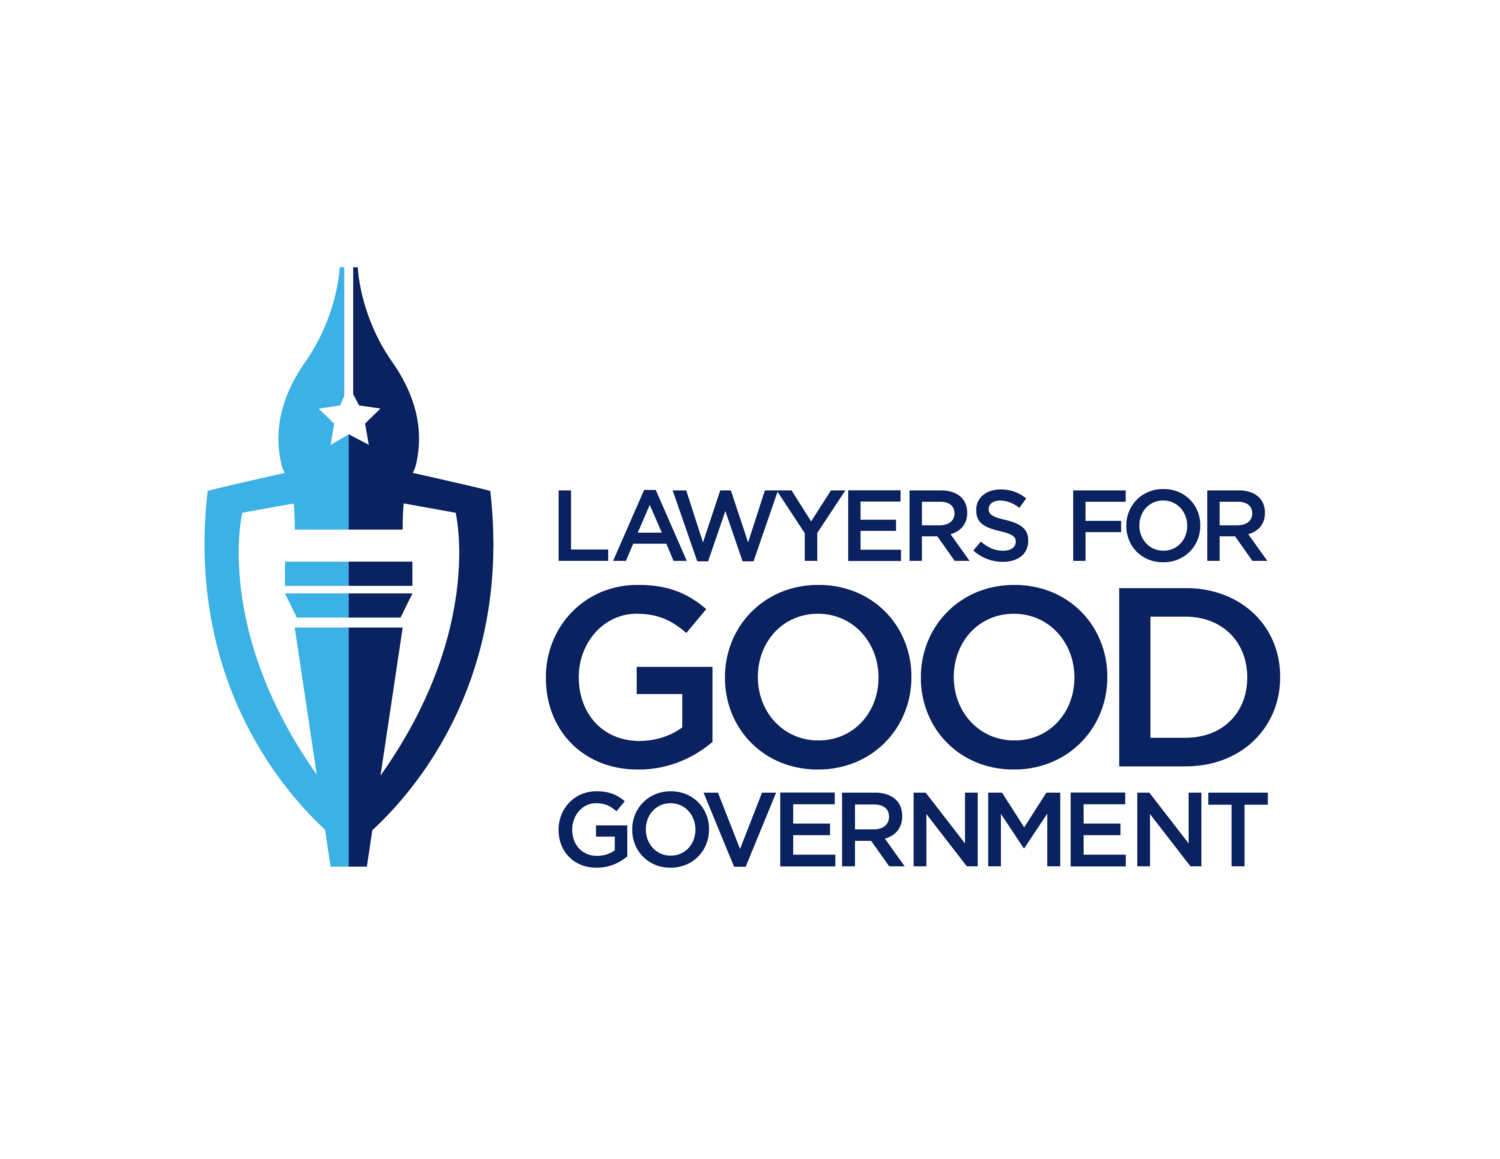 Lawyers for Good Government